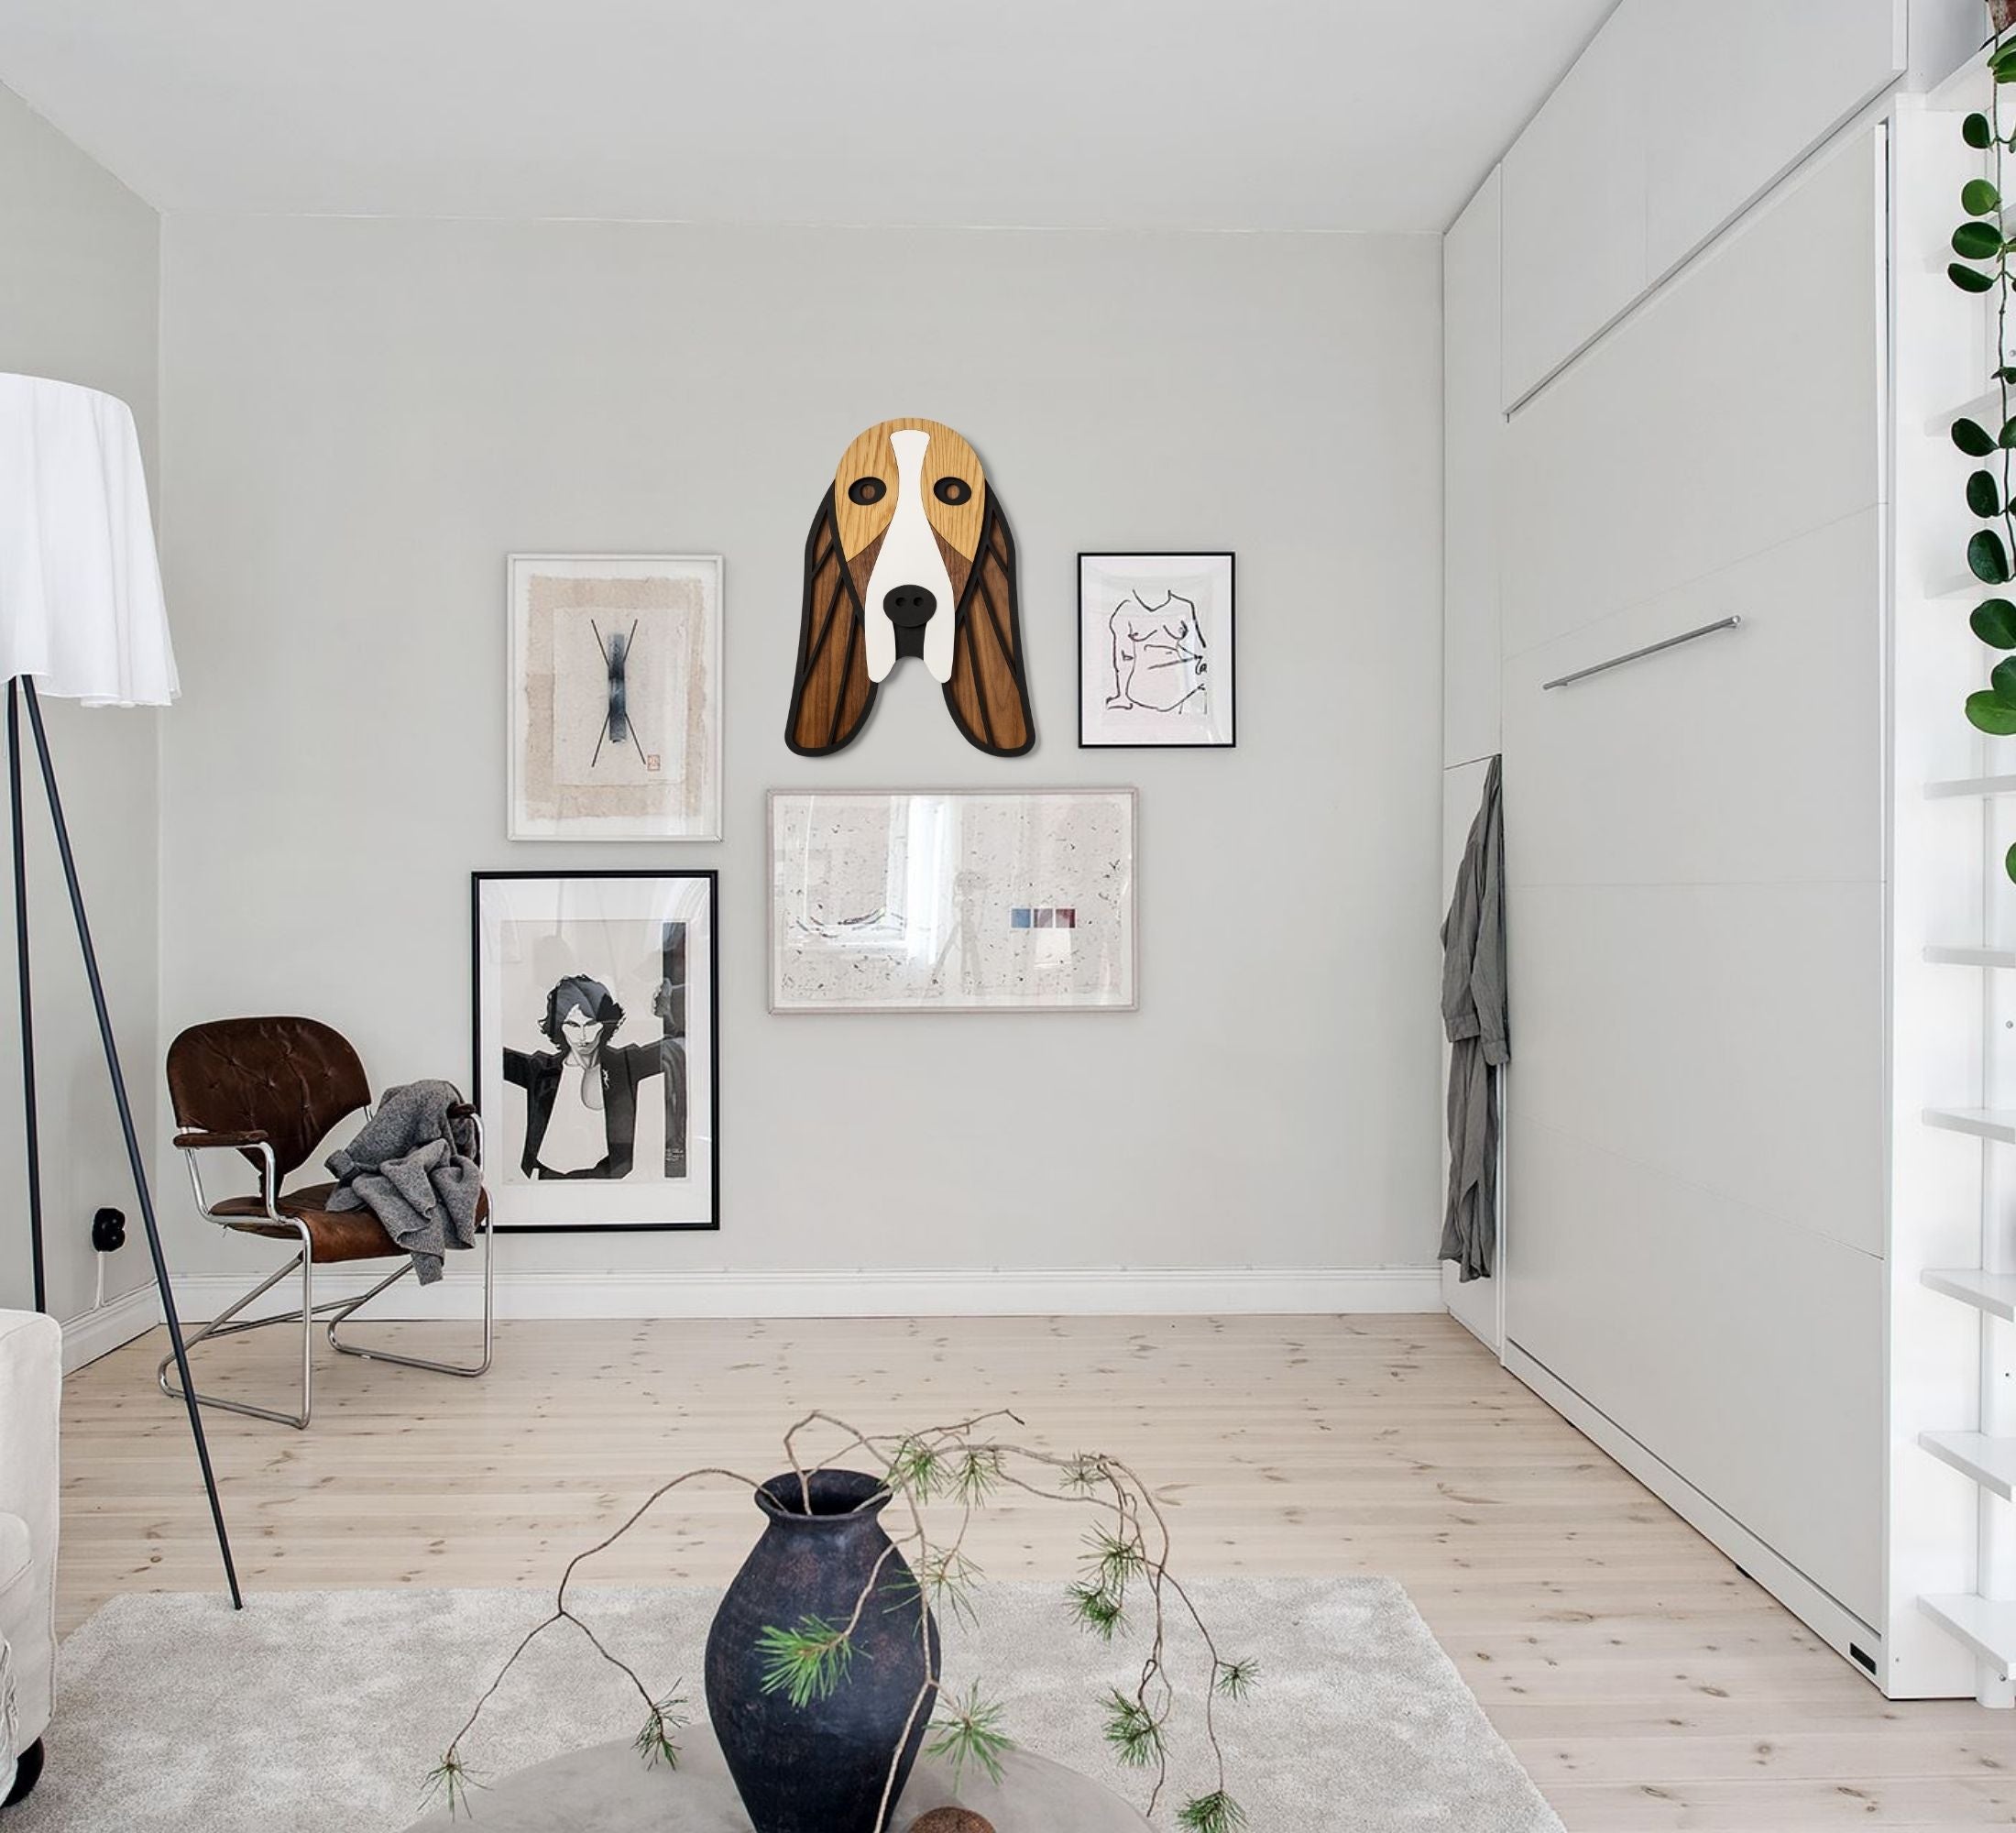 🐶Your dog - baby now is on your wall now: WOODEN ️ – The Sweet Home Make